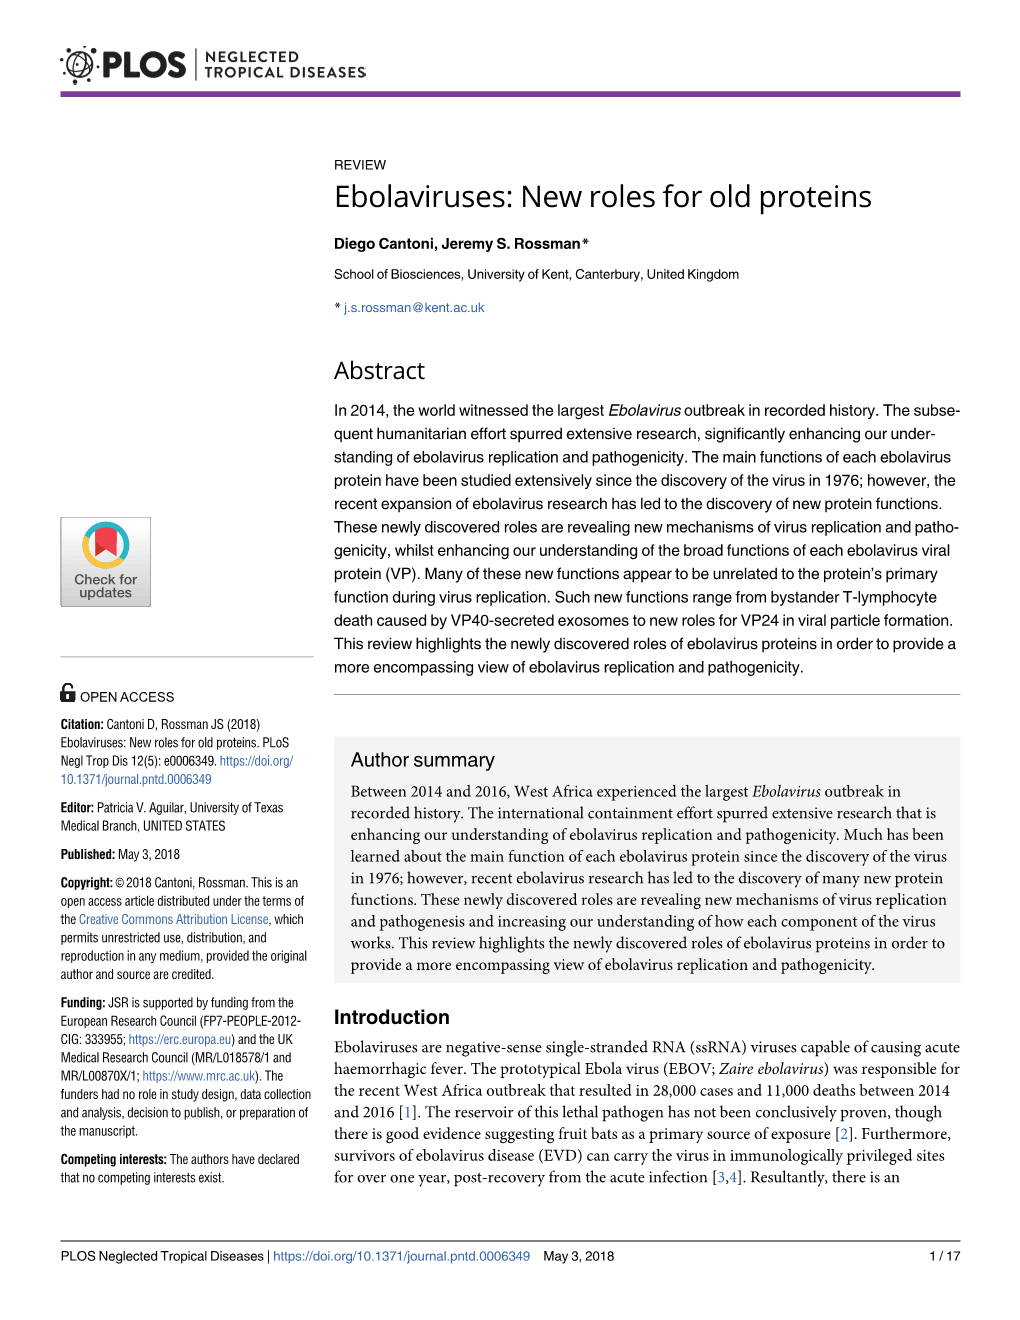 Ebolaviruses: New Roles for Old Proteins